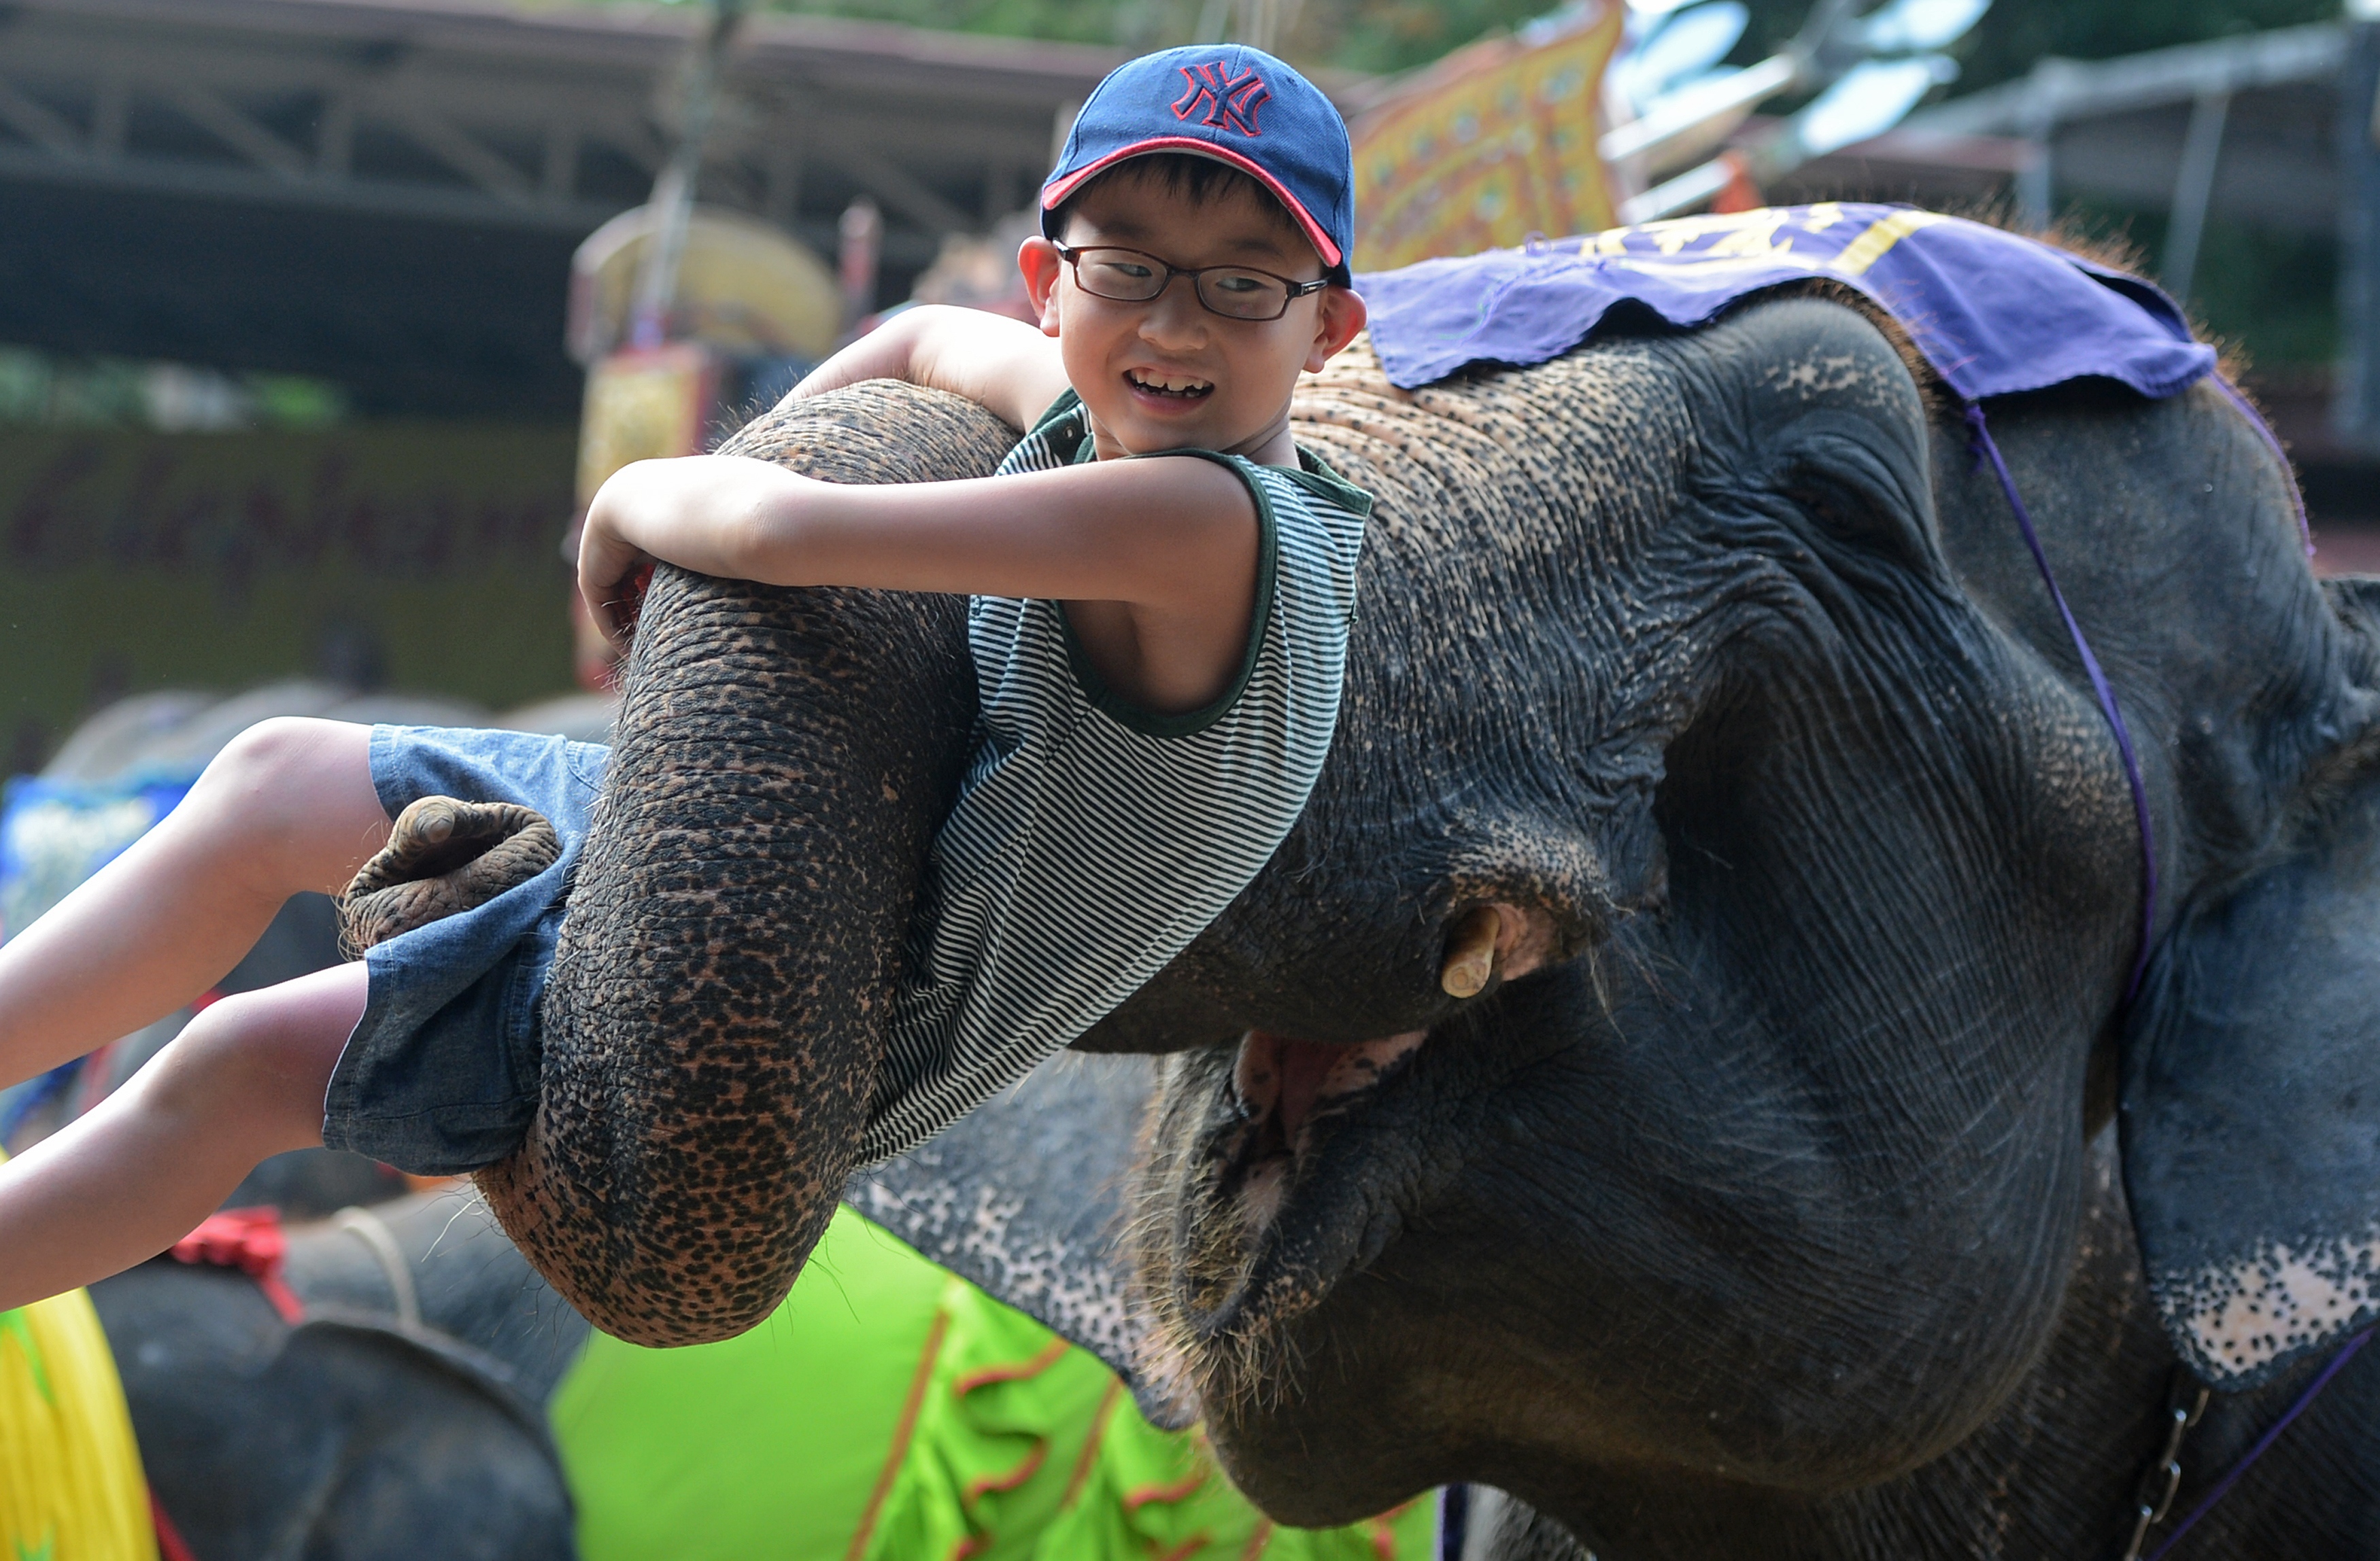 An elephant lifts a tourist during a show in Pattaya, Thailand on March 1, 2013.